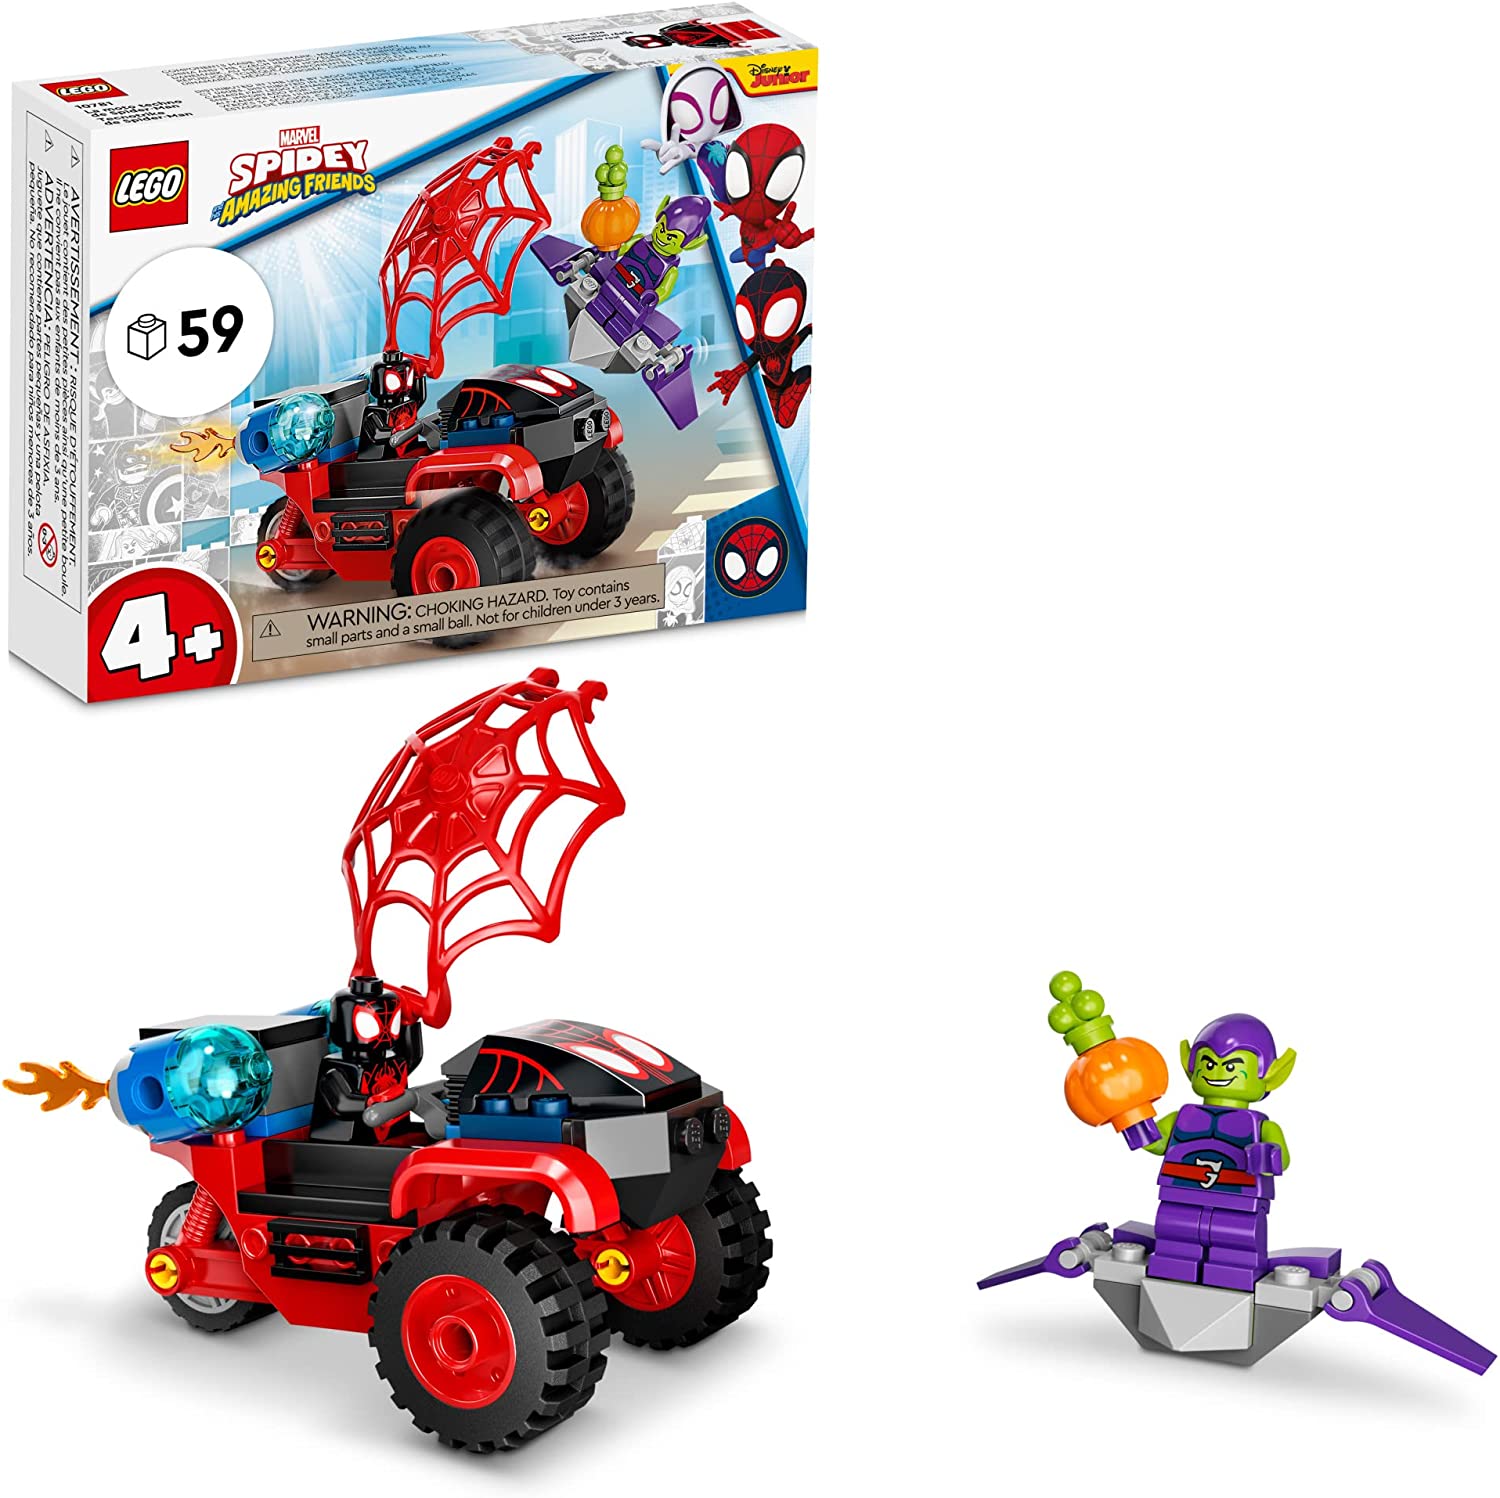 59-Pc LEGO Marvel Spidey & His Amazing Friends Miles Morales: Spider-Man's Techno Trike Building Kit (10781) $8 + FS w/ Amazon Prime or FS on $25+